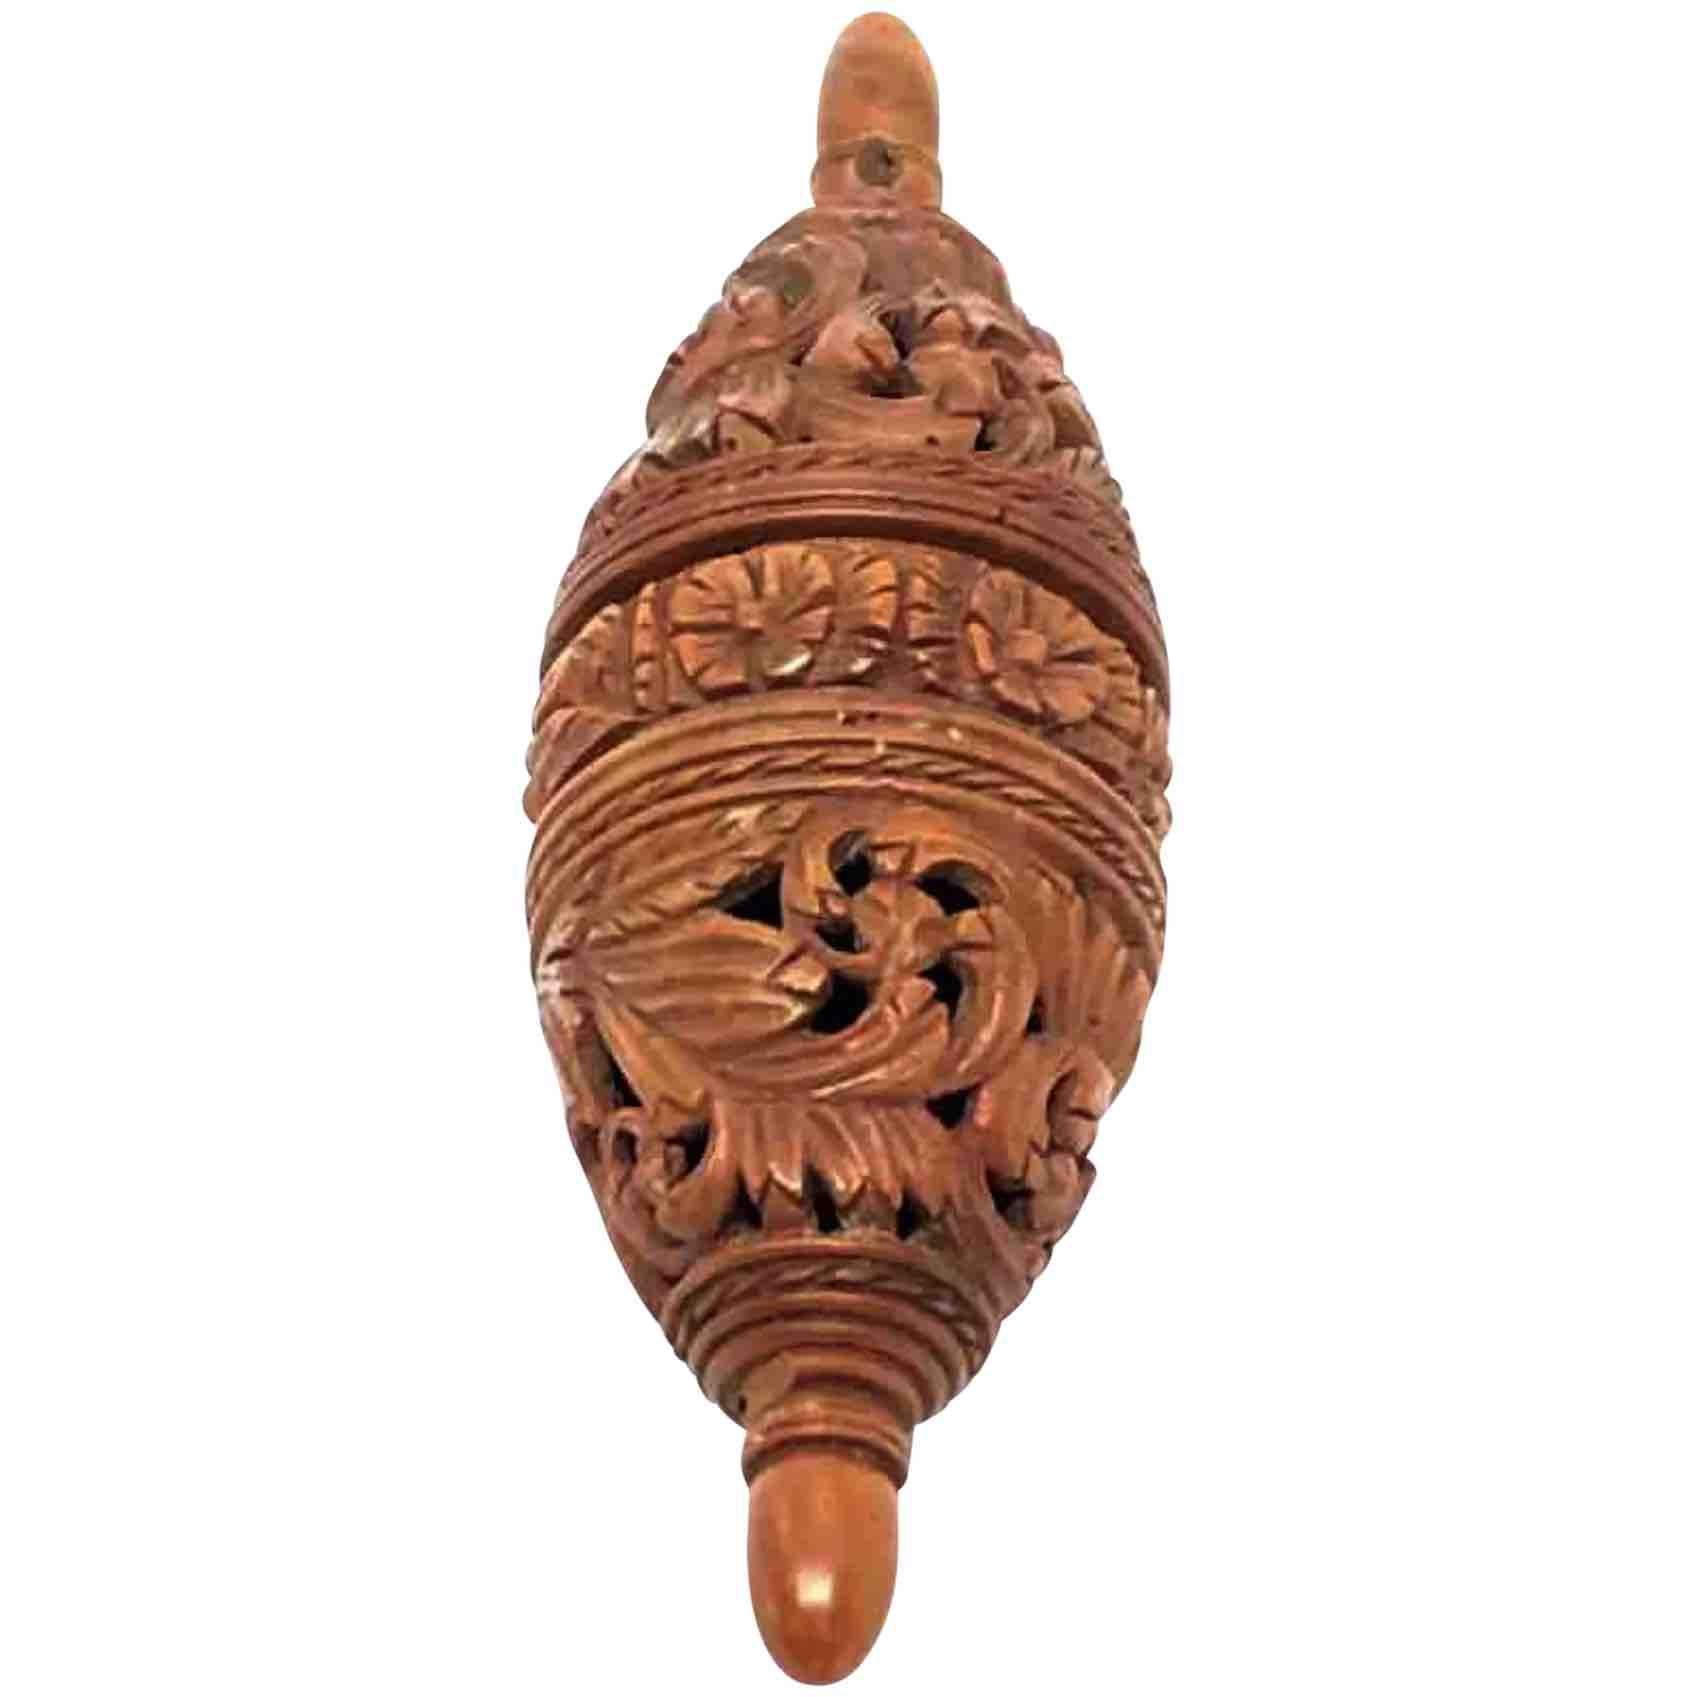 A beautiful hand carved coquille nut egg box. Beautiful carving, great patina, unscrews at center to open.
The original use was a flea trap, things were different in the old days and pesticides were not available.
So some stuff just flourished,